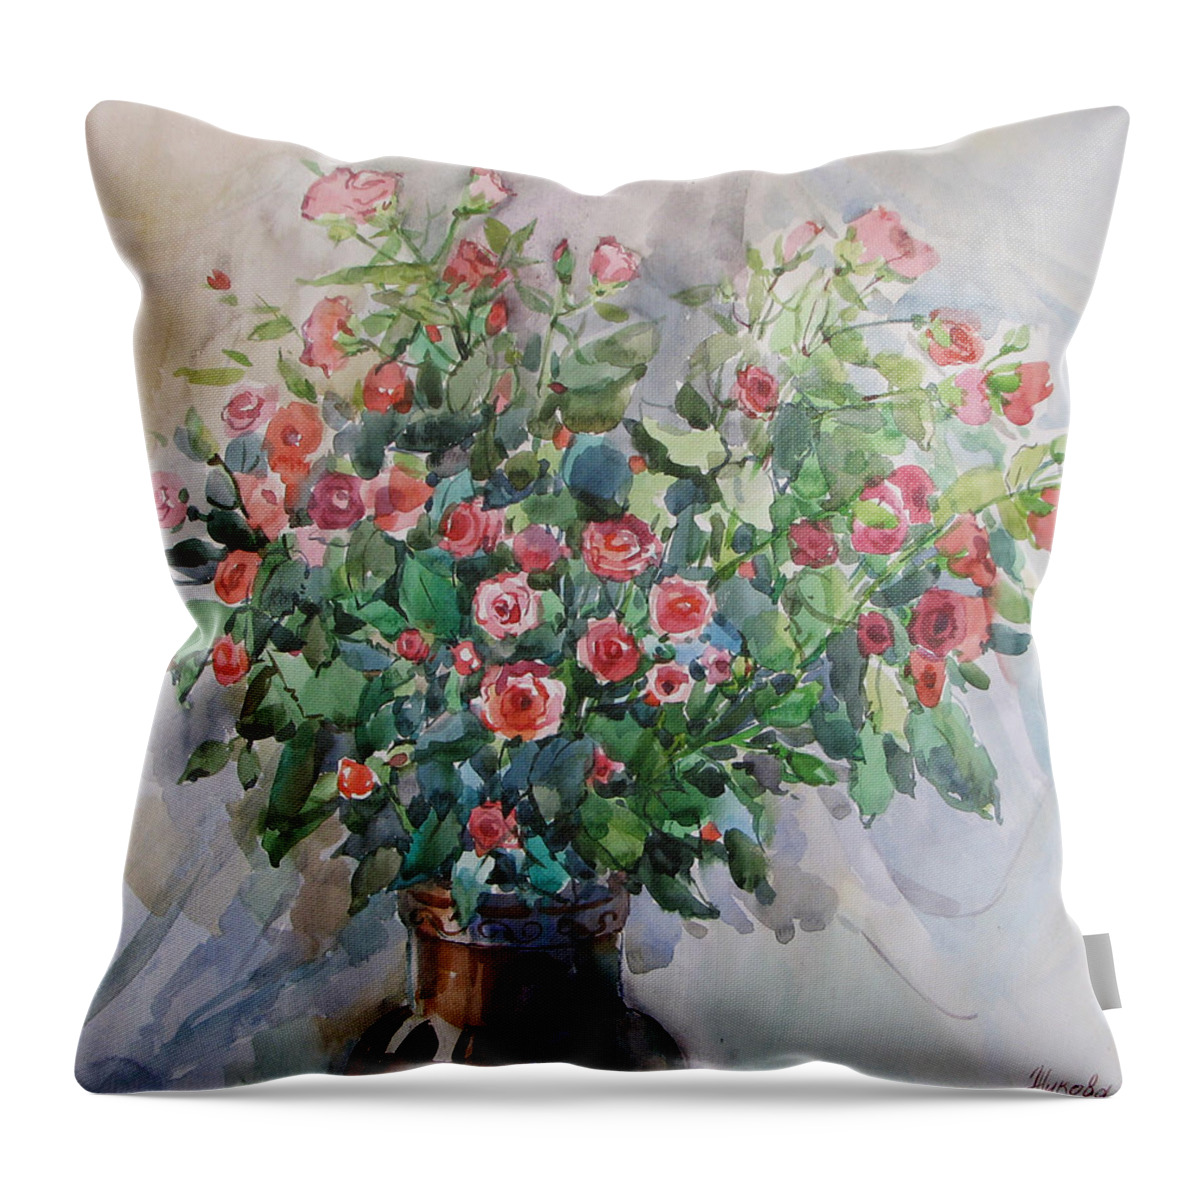 Painting Throw Pillow featuring the painting Gift by Juliya Zhukova